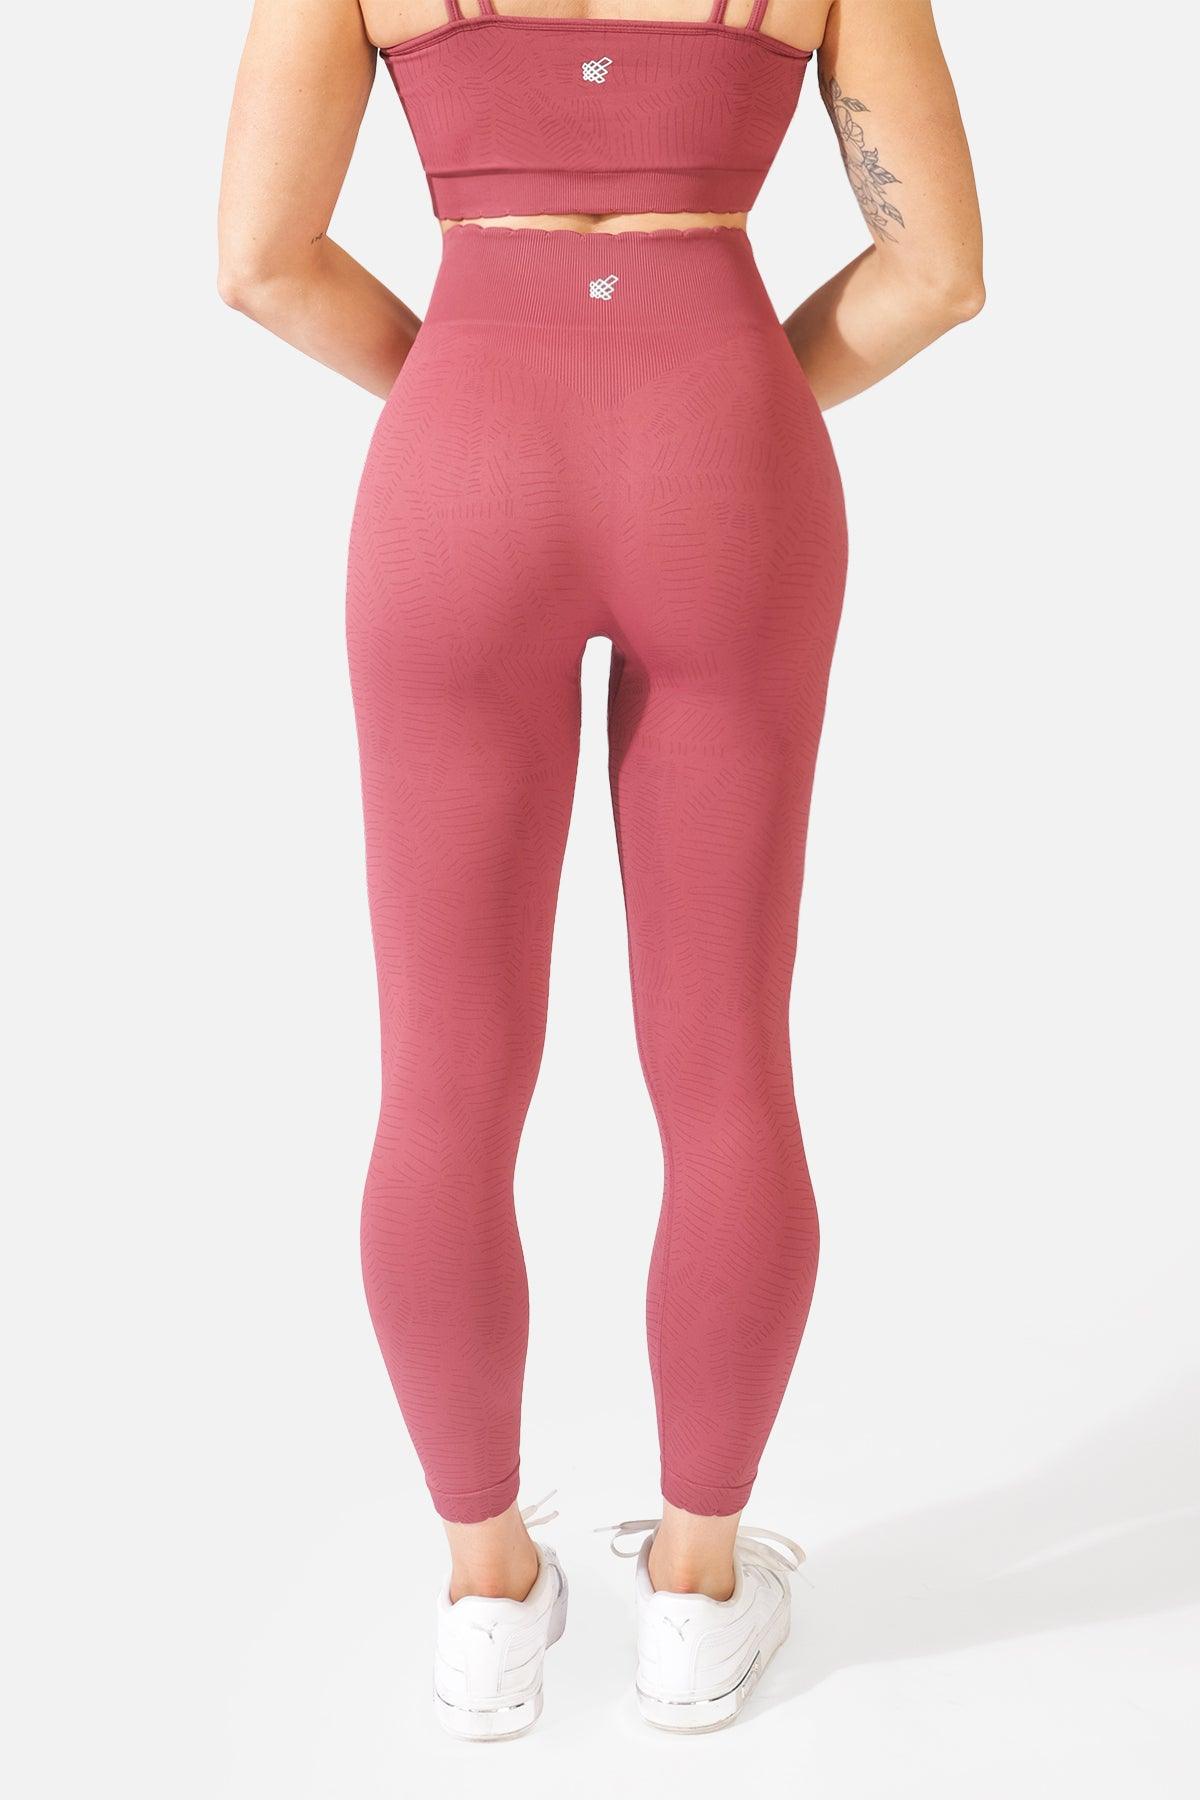 Scallop Hem Leggings - Etched Pink - Jed North Canada